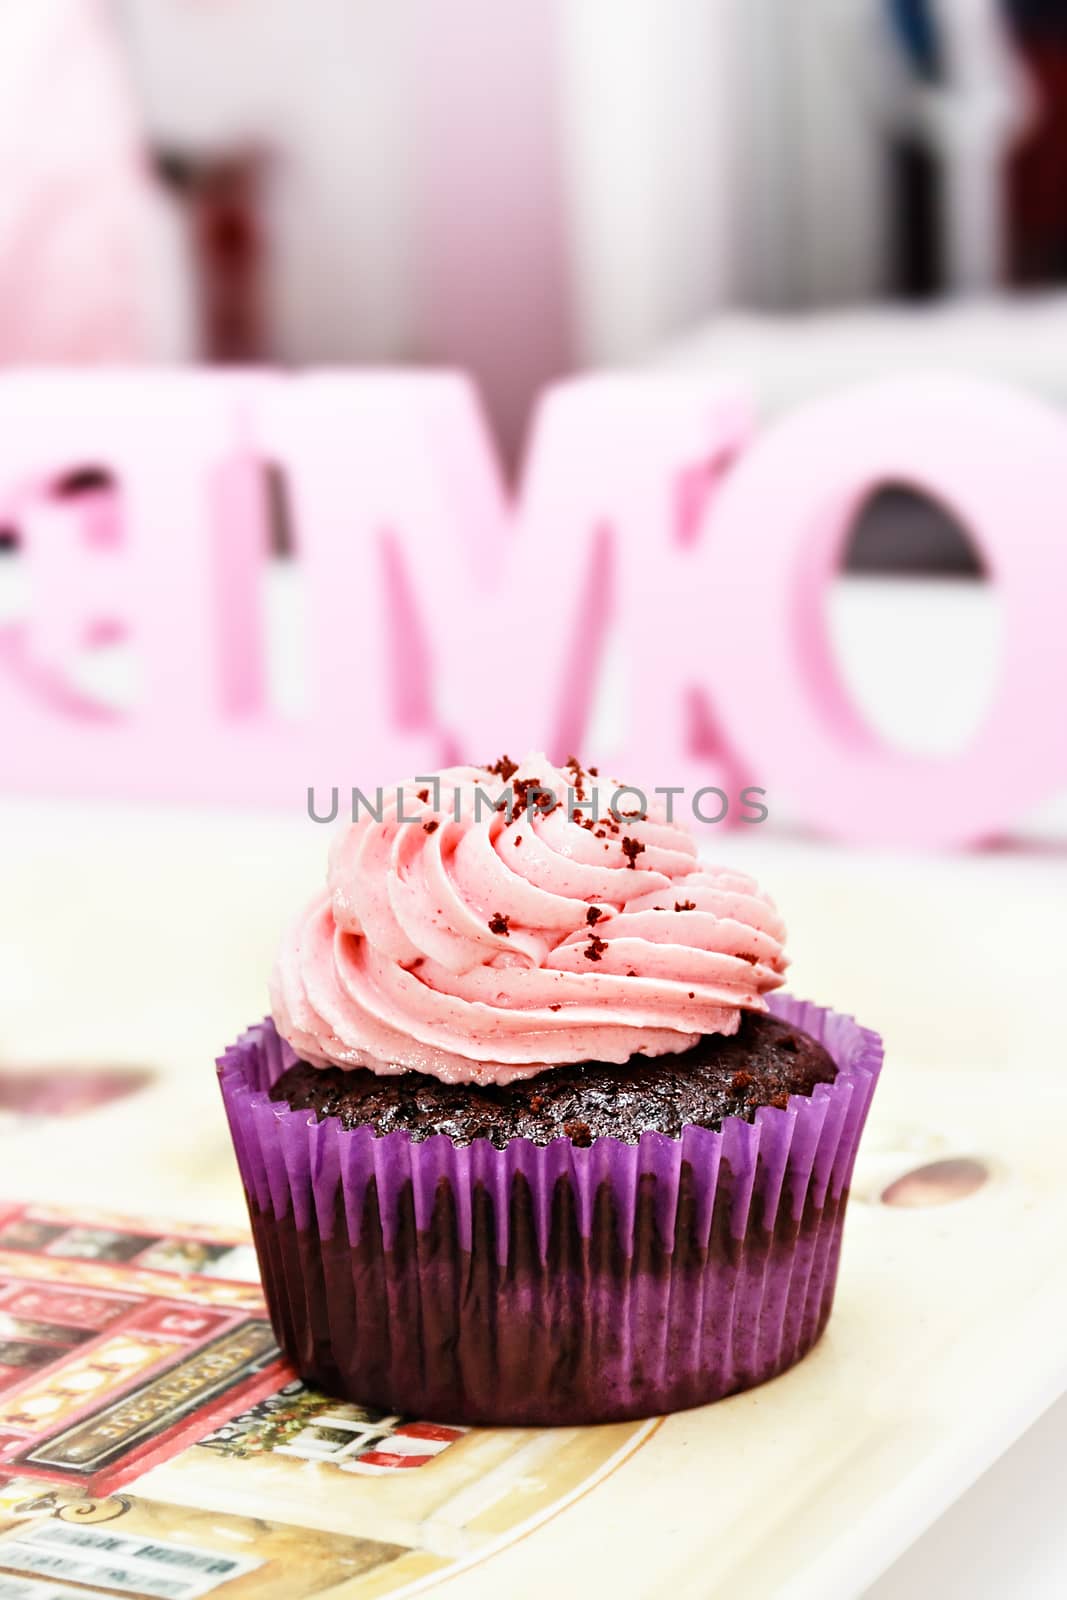 Chocolate and strawberry cream cupcake on a professional bakery. Vertical image.